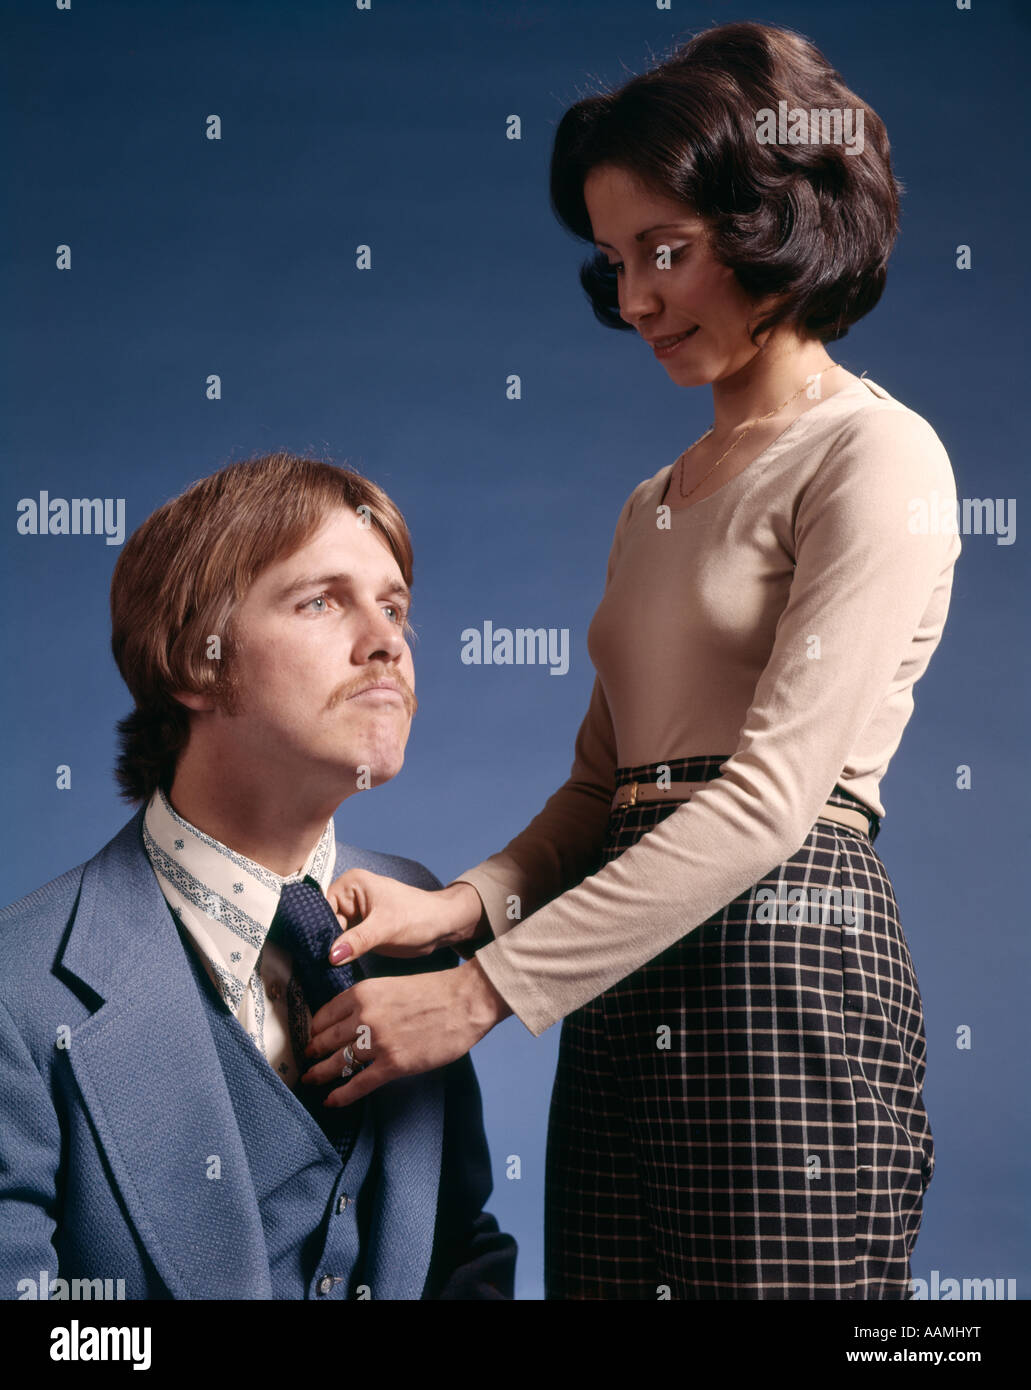 1970s COUPLE WOMAN FIXING TIE NECKTIE OF MAN SEATED BESIDE HER HUSBAND WIFE FASHION RETRO VINTAGE BLUE BACKGROUND Stock Photo